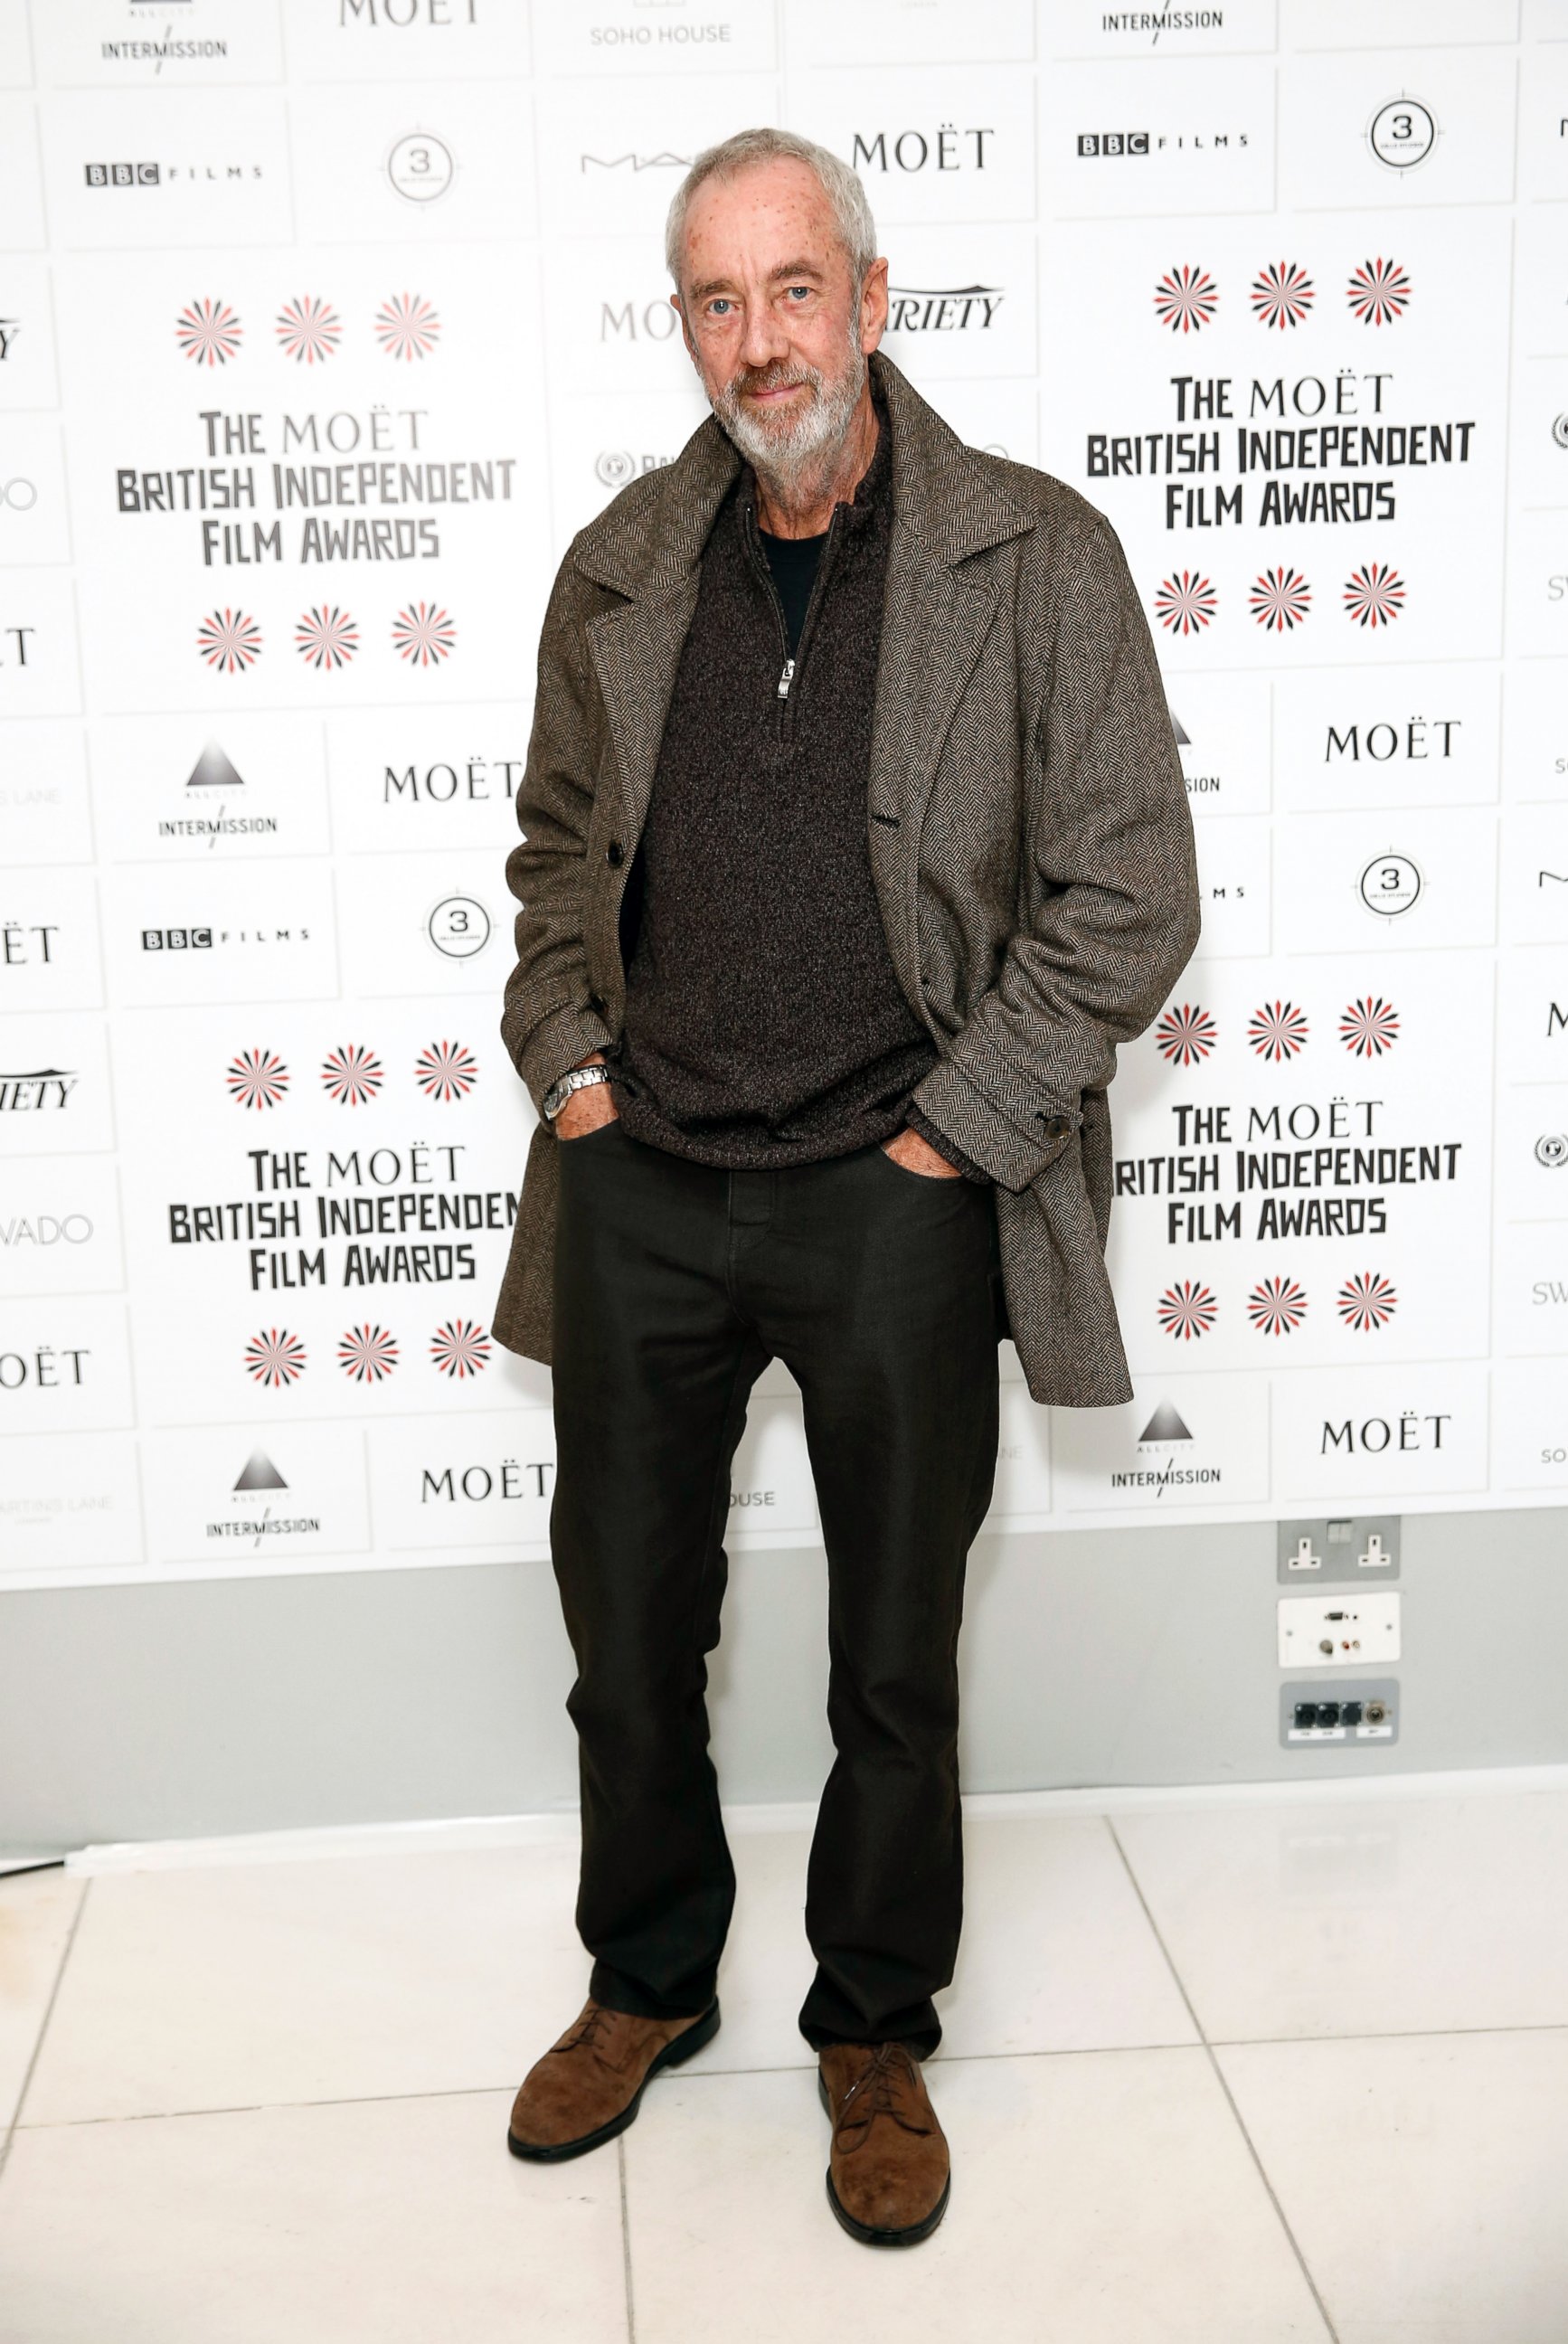 PHOTO: Dick Pope attends the nominations launch for the British Independent Film Awards at St. Martins Lane Hotel, Nov. 3, 2014, in London.